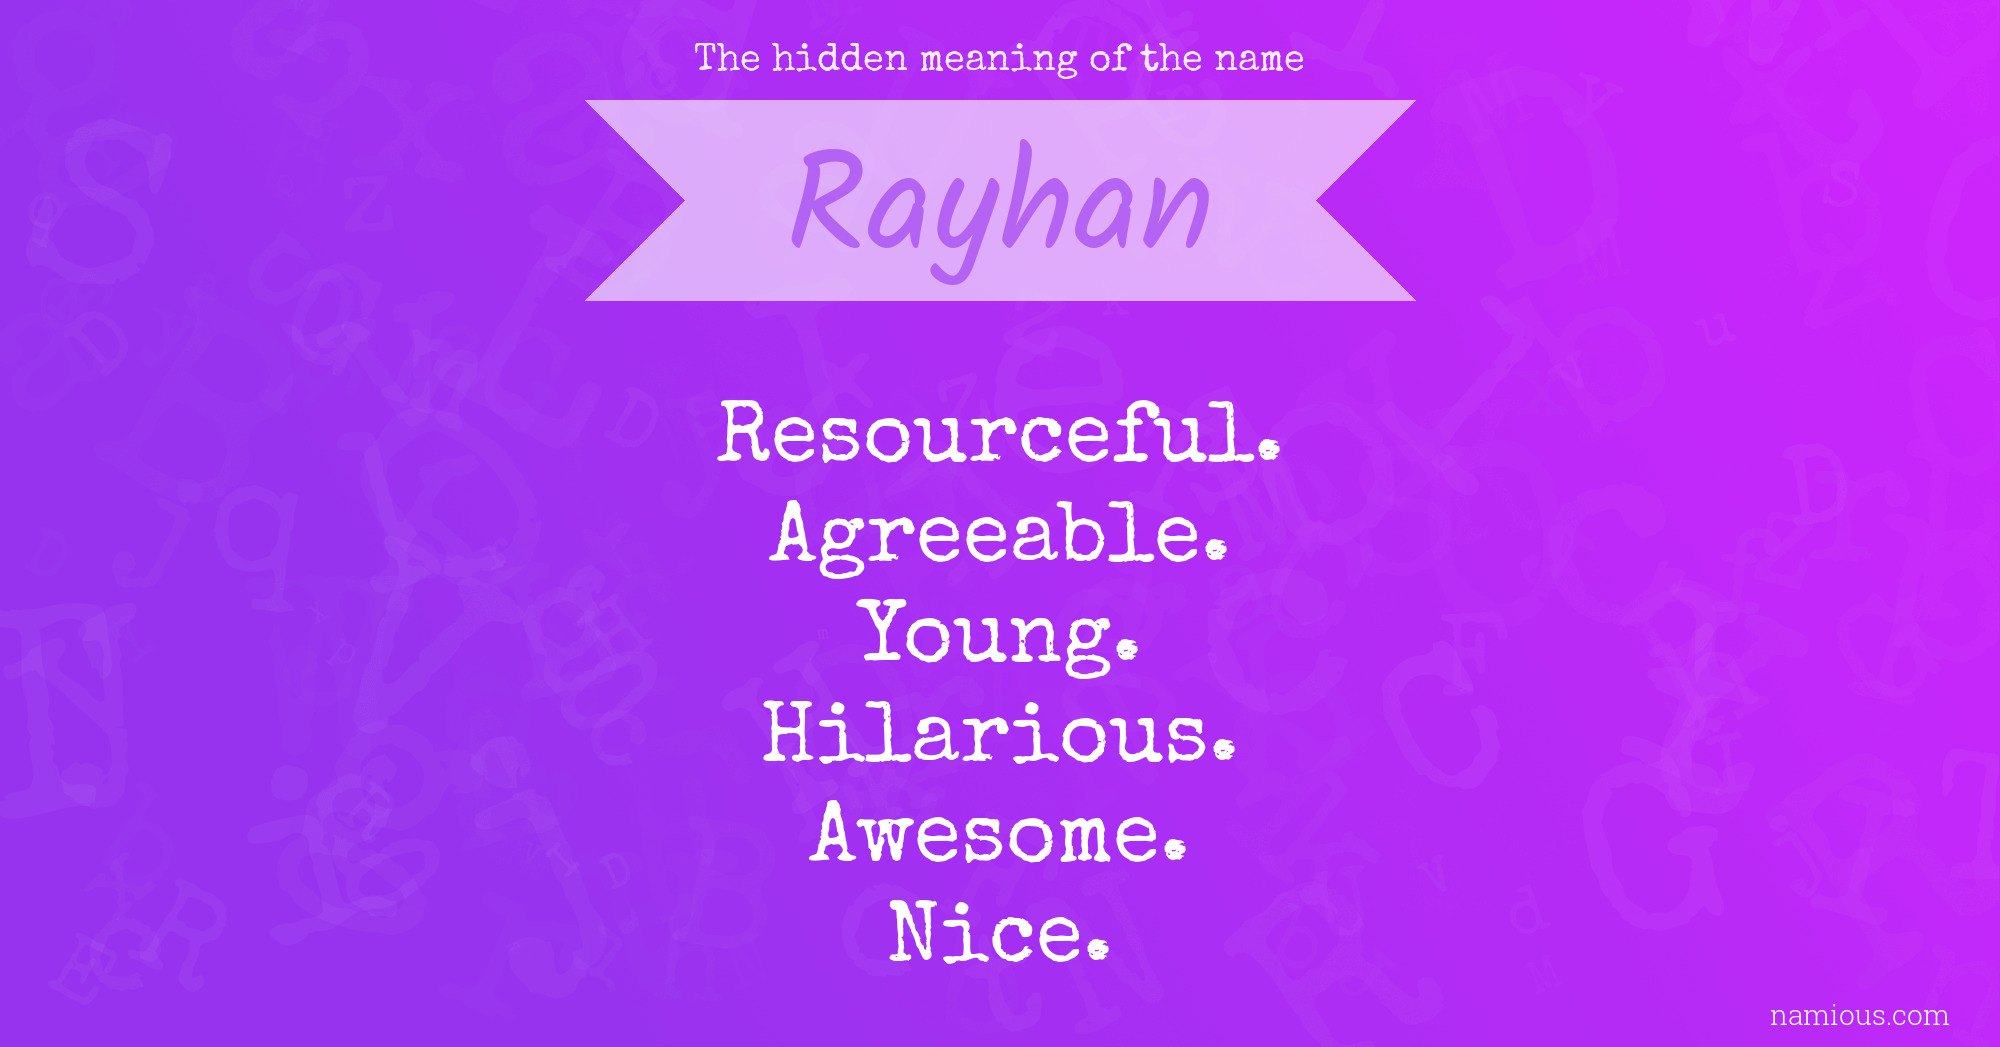 The hidden meaning of the name Rayhan